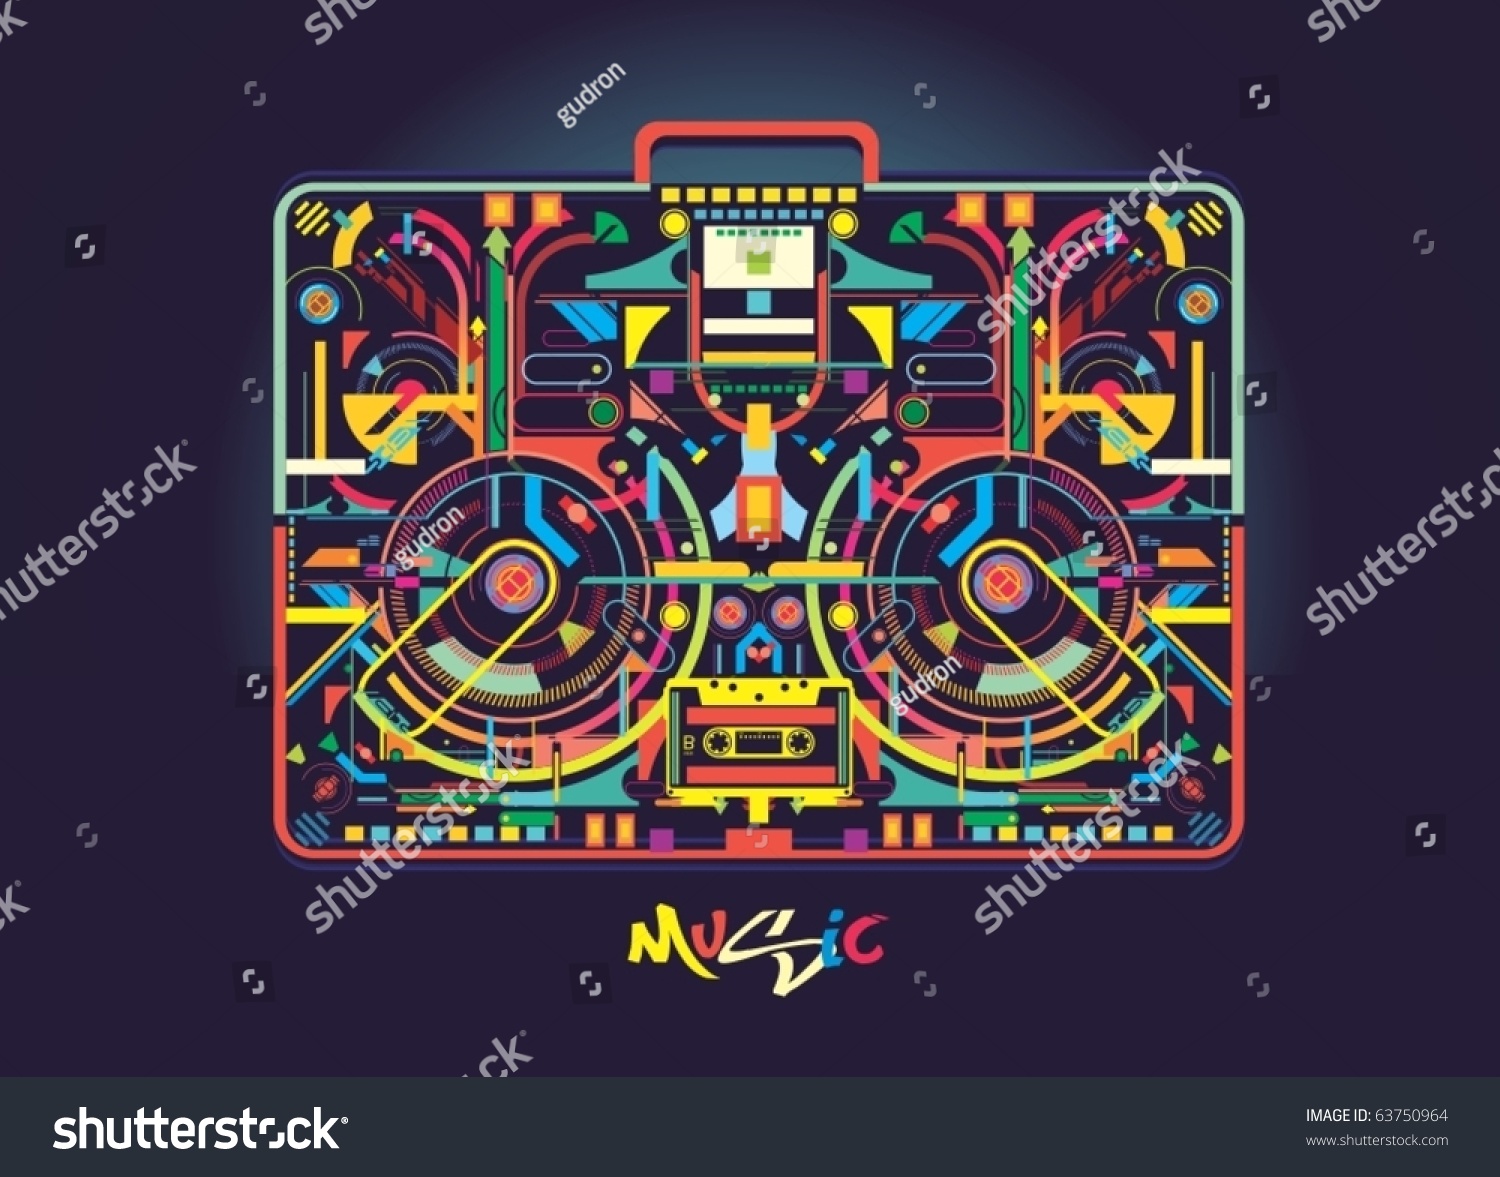 SVG of Boombox illustration created from colorful abstract shapes,vector svg